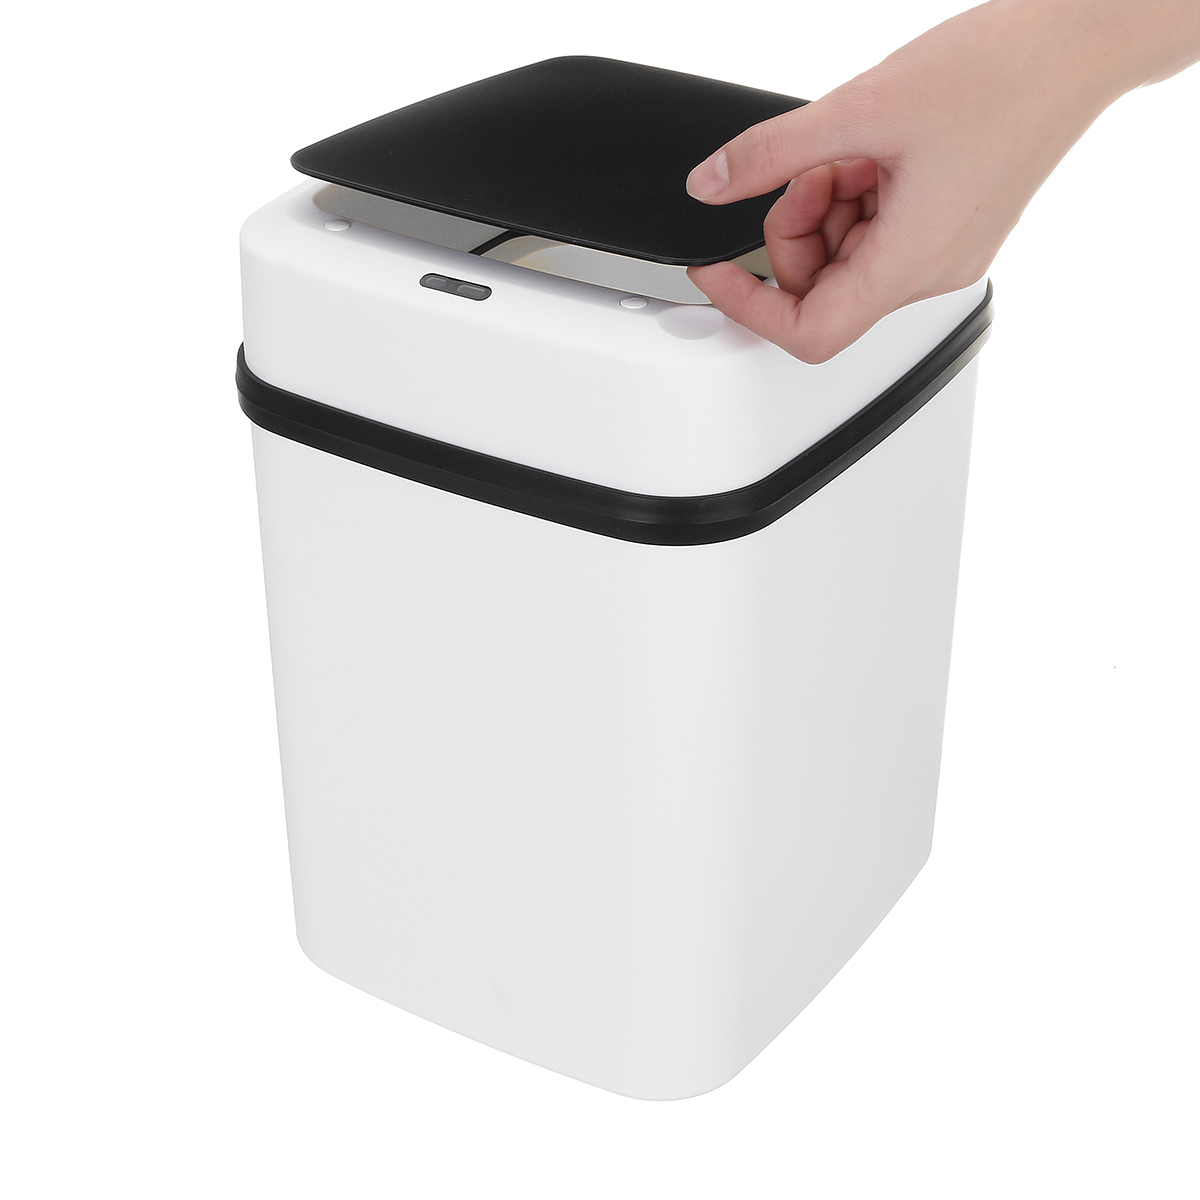 Full-Automatic-Sensor-Rechargeable-Waste-Bins-Household-Smart-Trash-Can-1613282-7